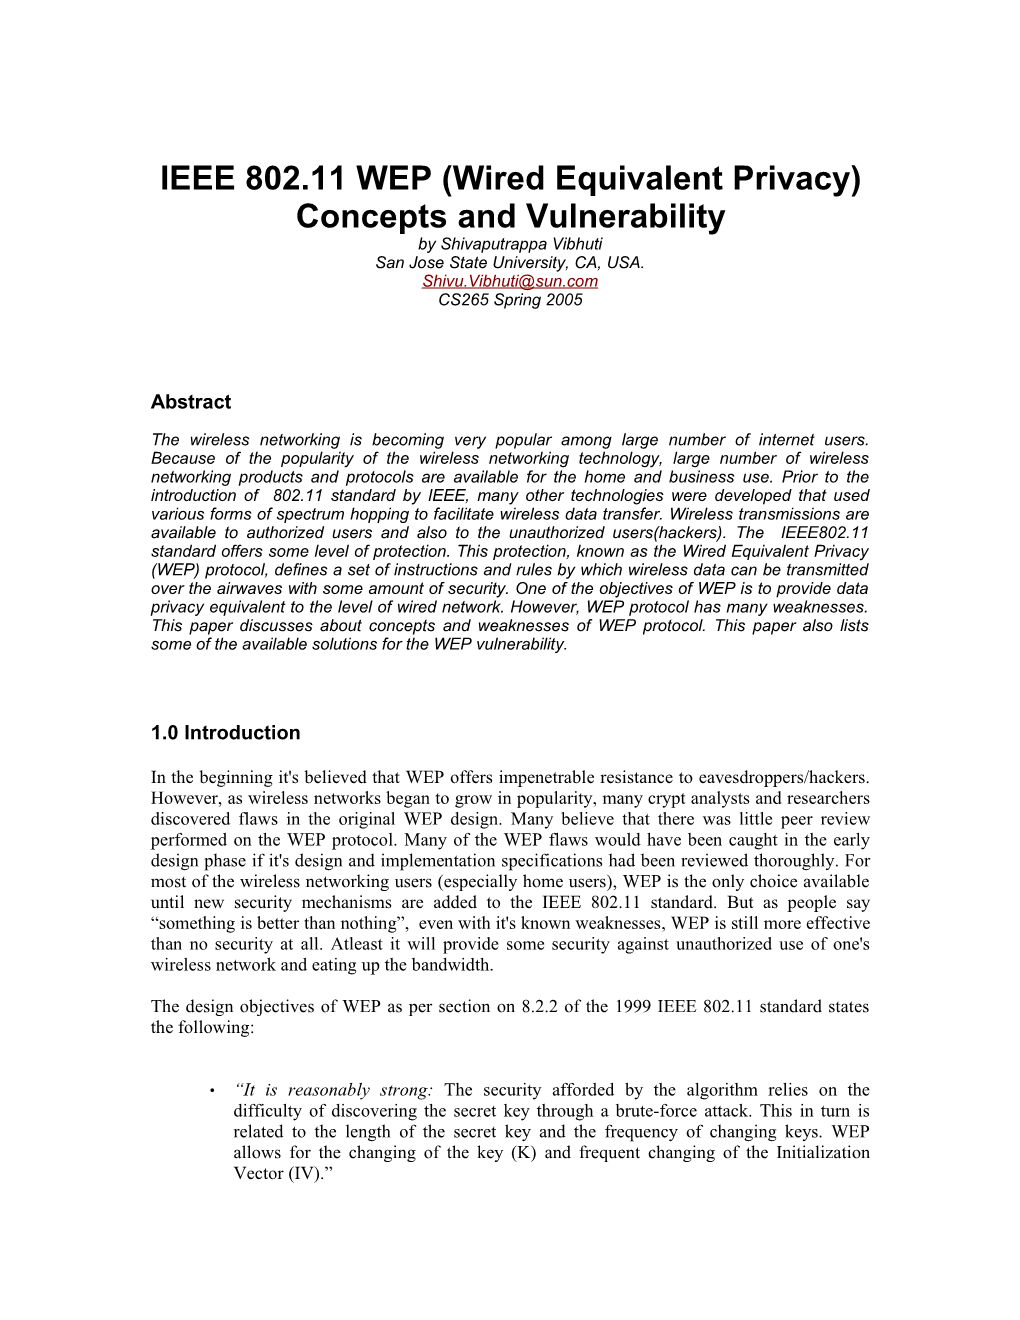 IEEE 802.11 WEP (Wired Equivalent Privacy) Concepts and Vulnerability by Shivaputrappa Vibhuti San Jose State University, CA, USA